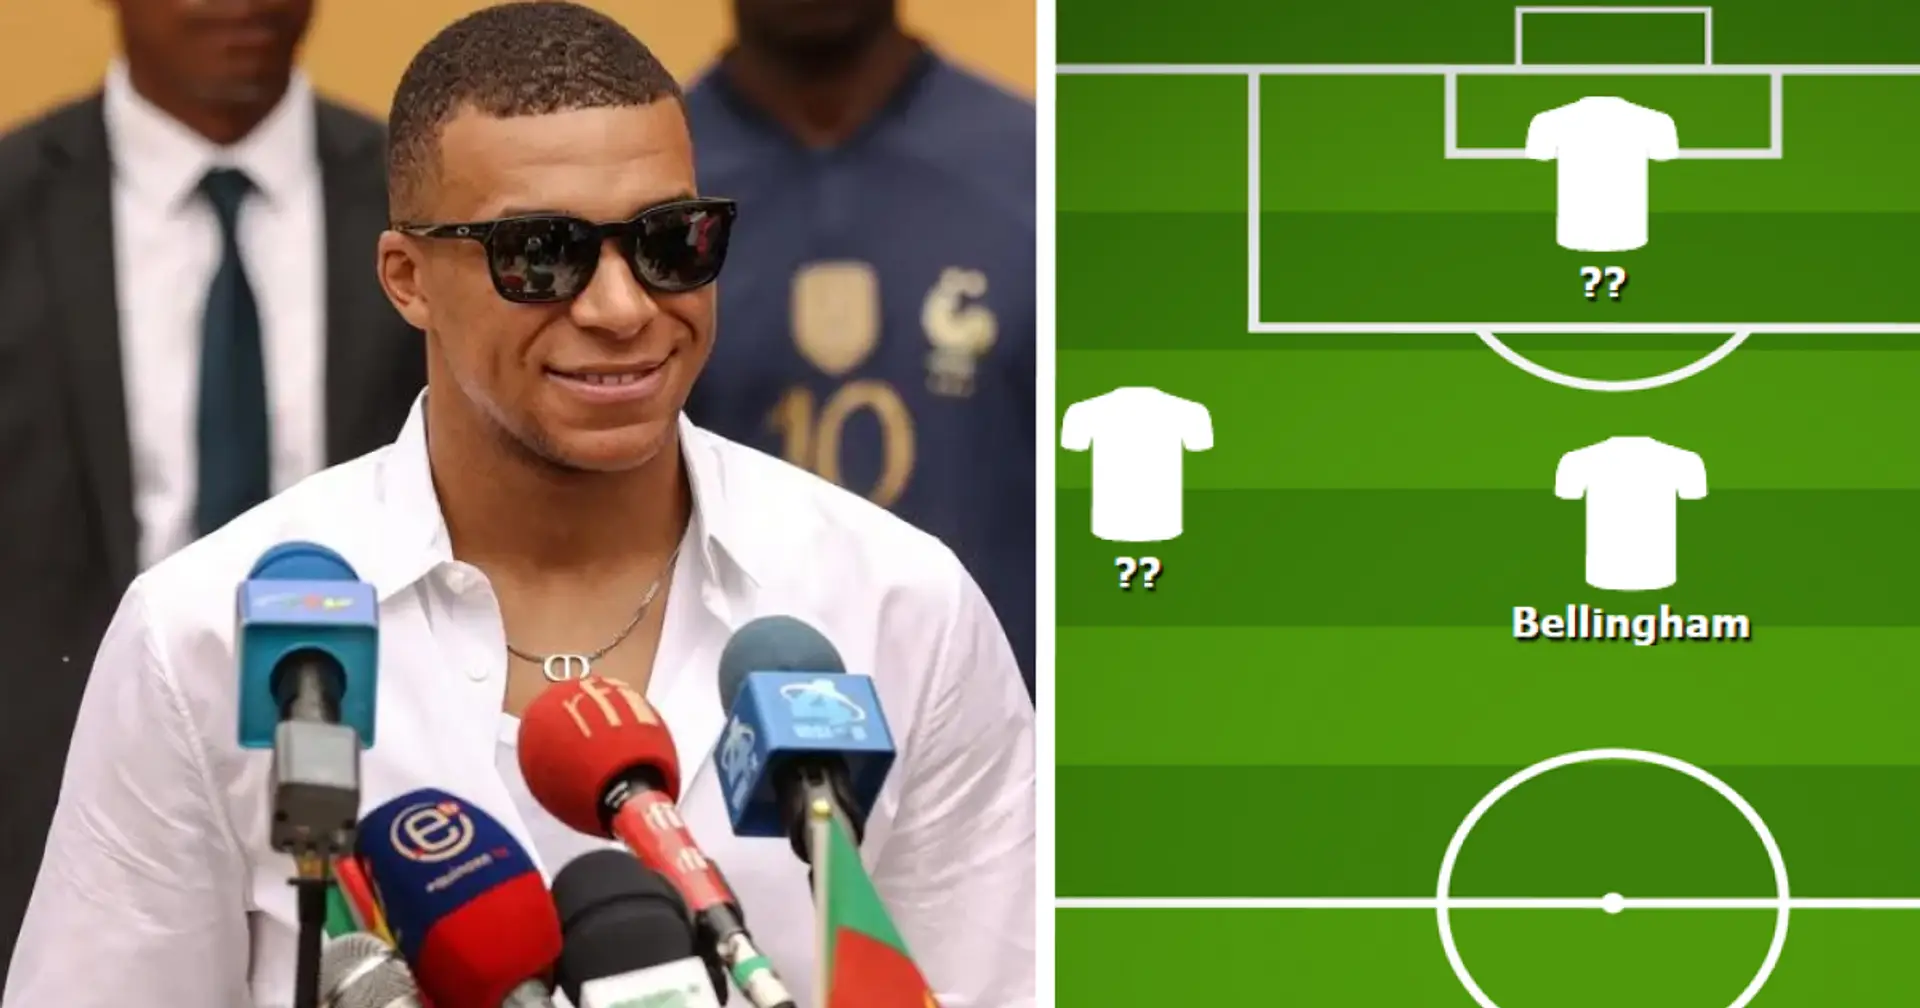 Kylian Mbappe attracted to play one position at Real Madrid, it has to do with Ballon d'Or